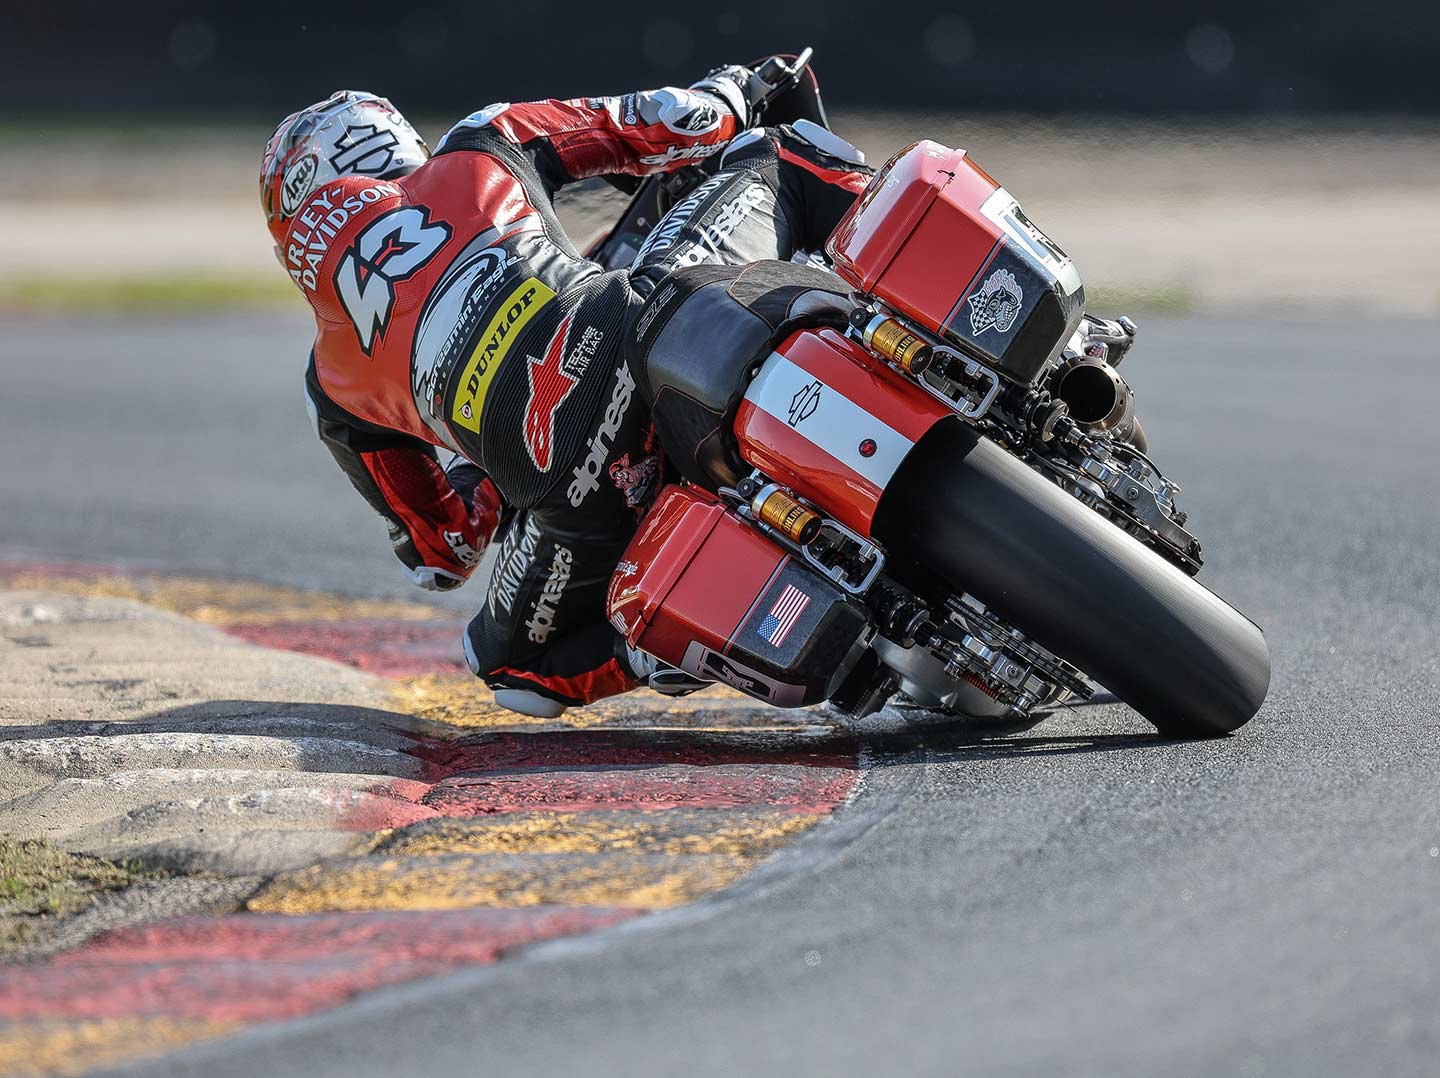 Harley-Davidson factory rider James Rispoli coaxing his 185-hp 620-ish pound Road Glide into a corner.